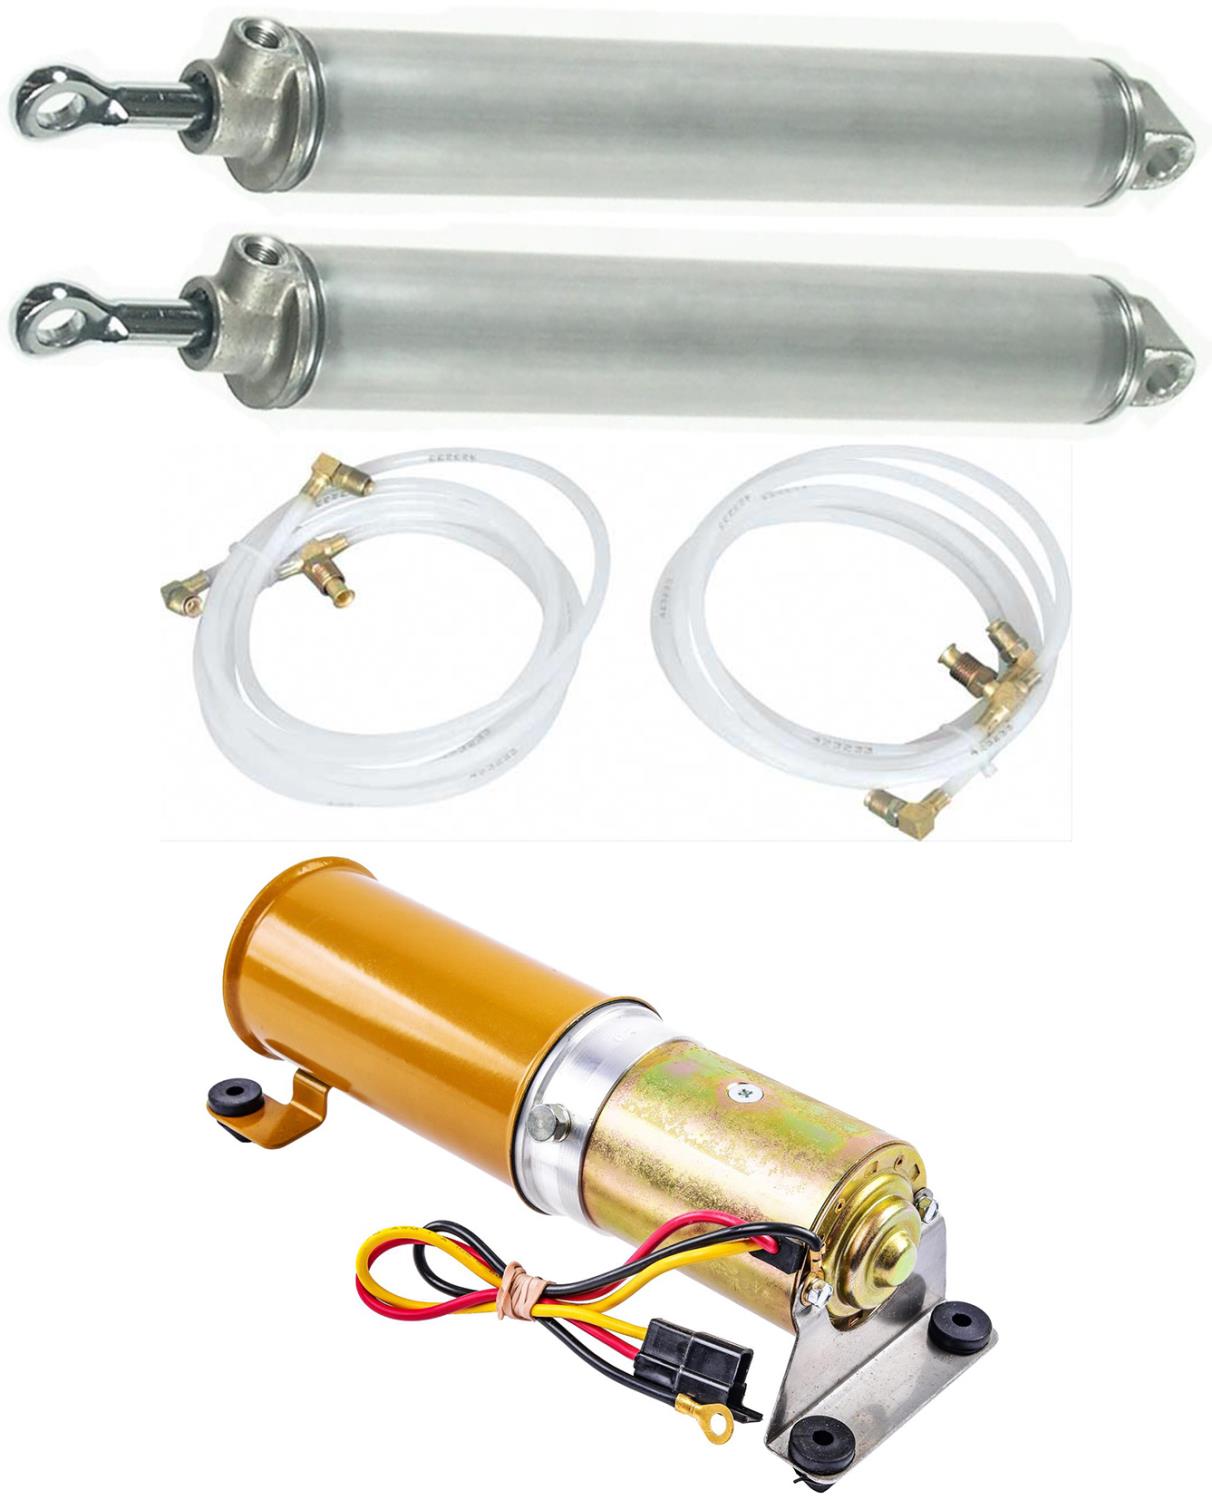 Convertible Top Cylinder, Motor & Hose Kit for 1962 Buick, Cadillac, Chevy, Oldsmobile, Pontiac Convertibles [Sold as a Kit]